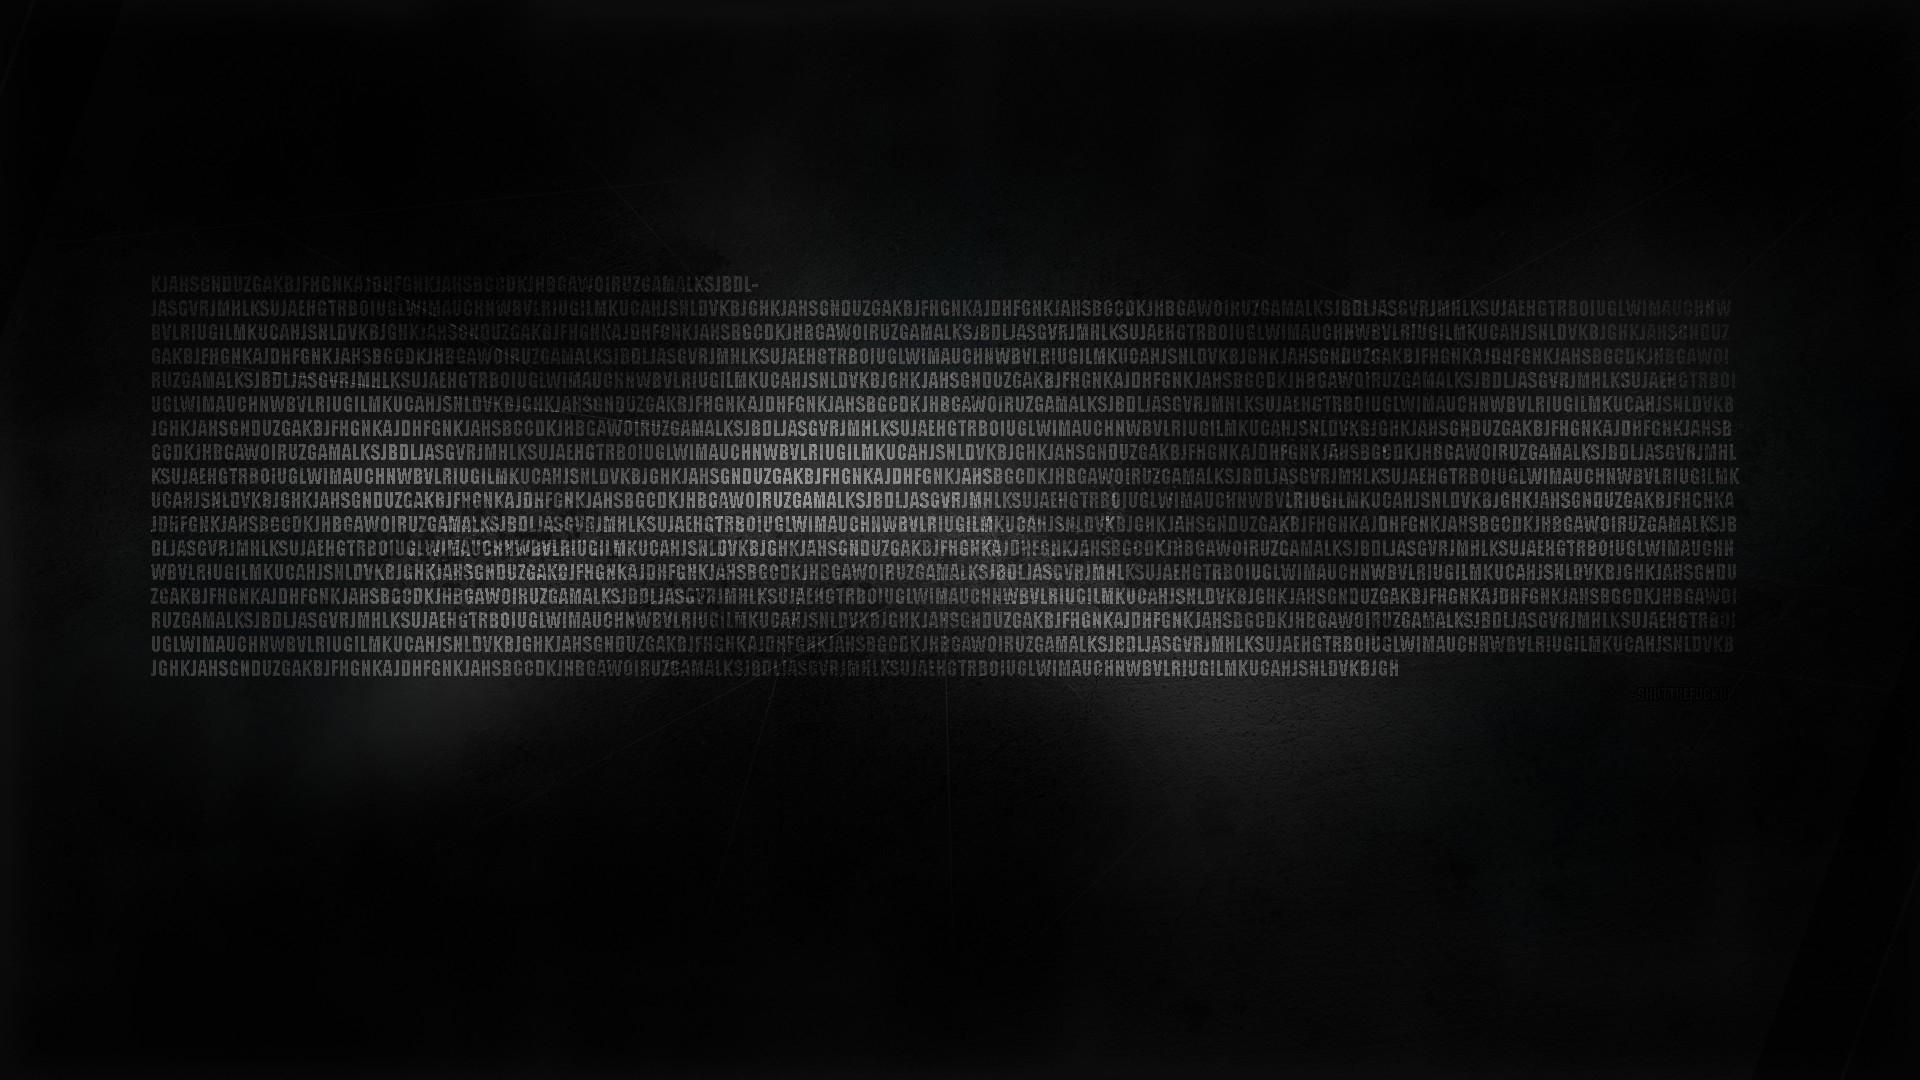 Wallpaper Dark Aesthetic Desktop with high-resolution 1920x1080 pixel. You can use this wallpaper for your Windows and Mac OS computers as well as your Android and iPhone smartphones